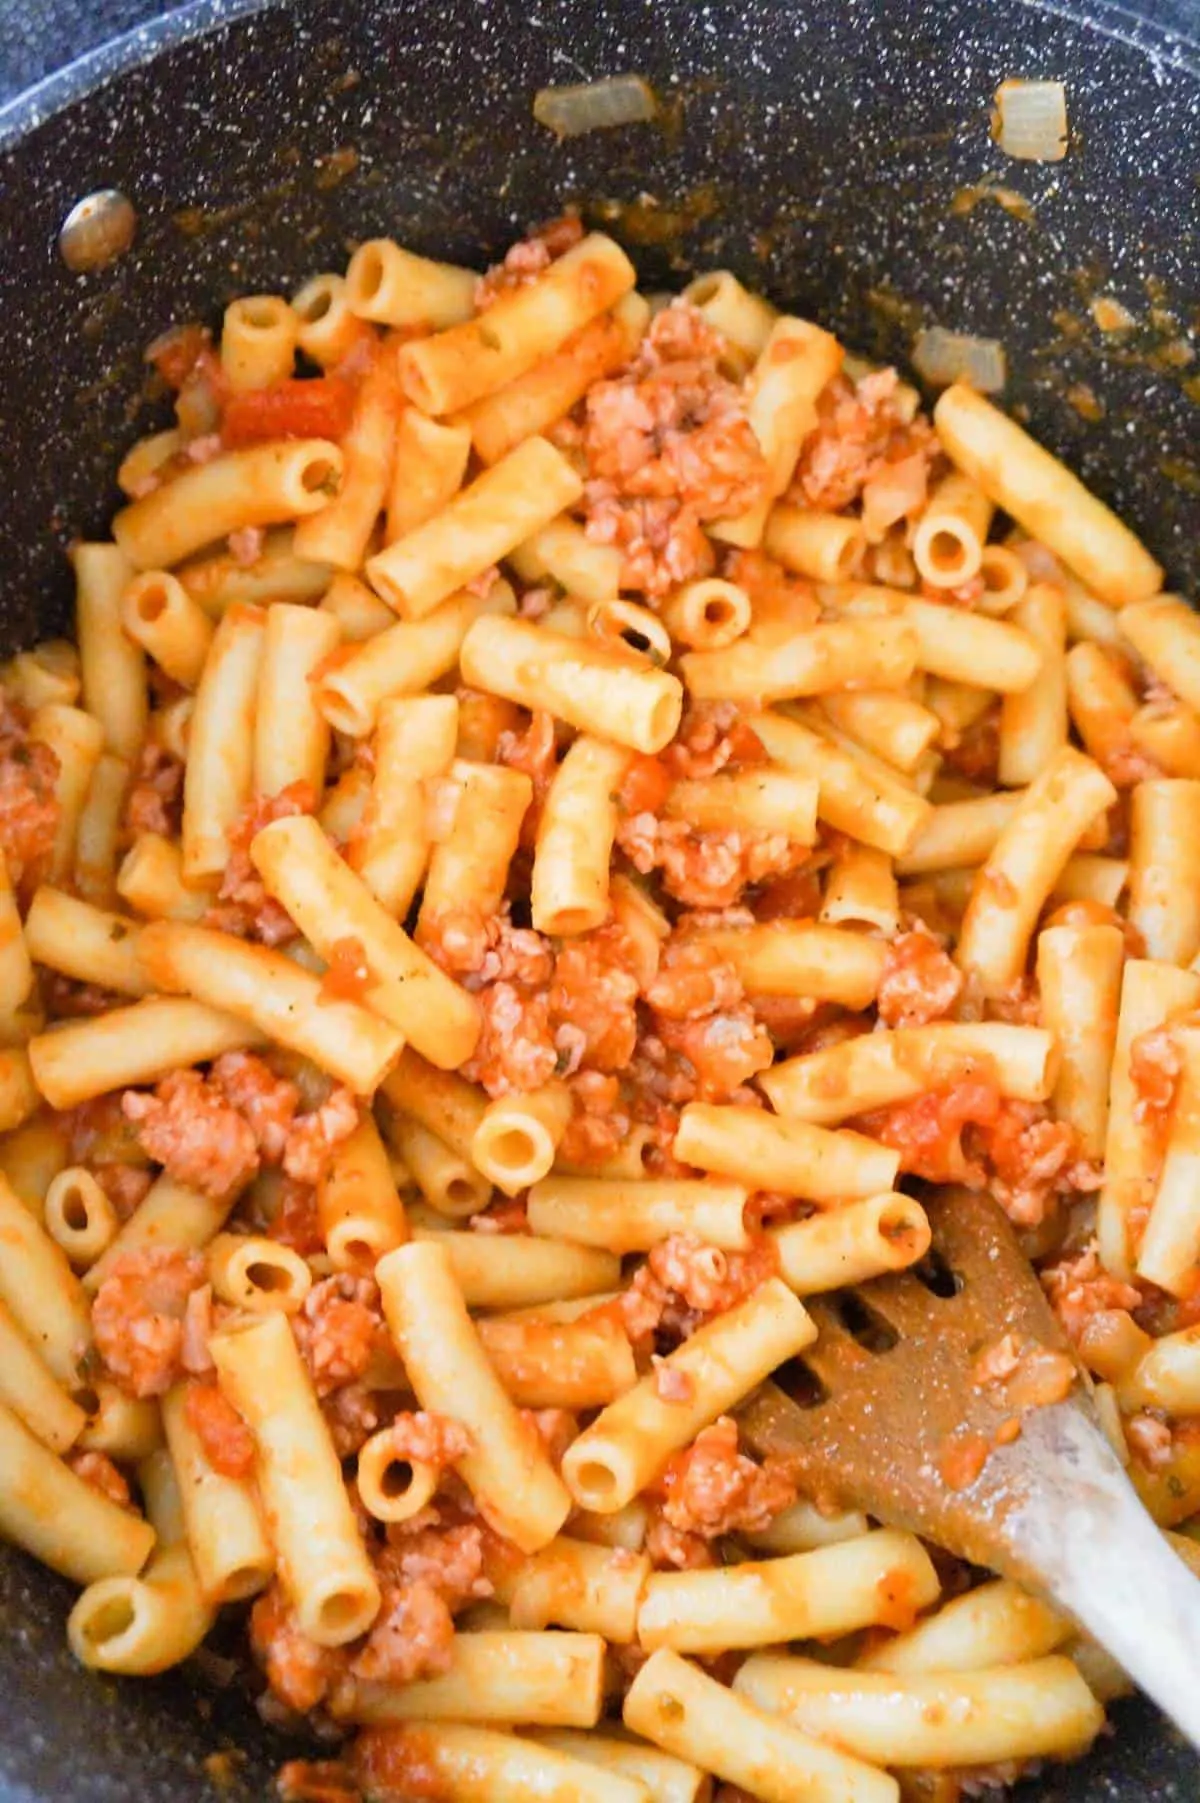 ziti with ground sausage meat in a large pot